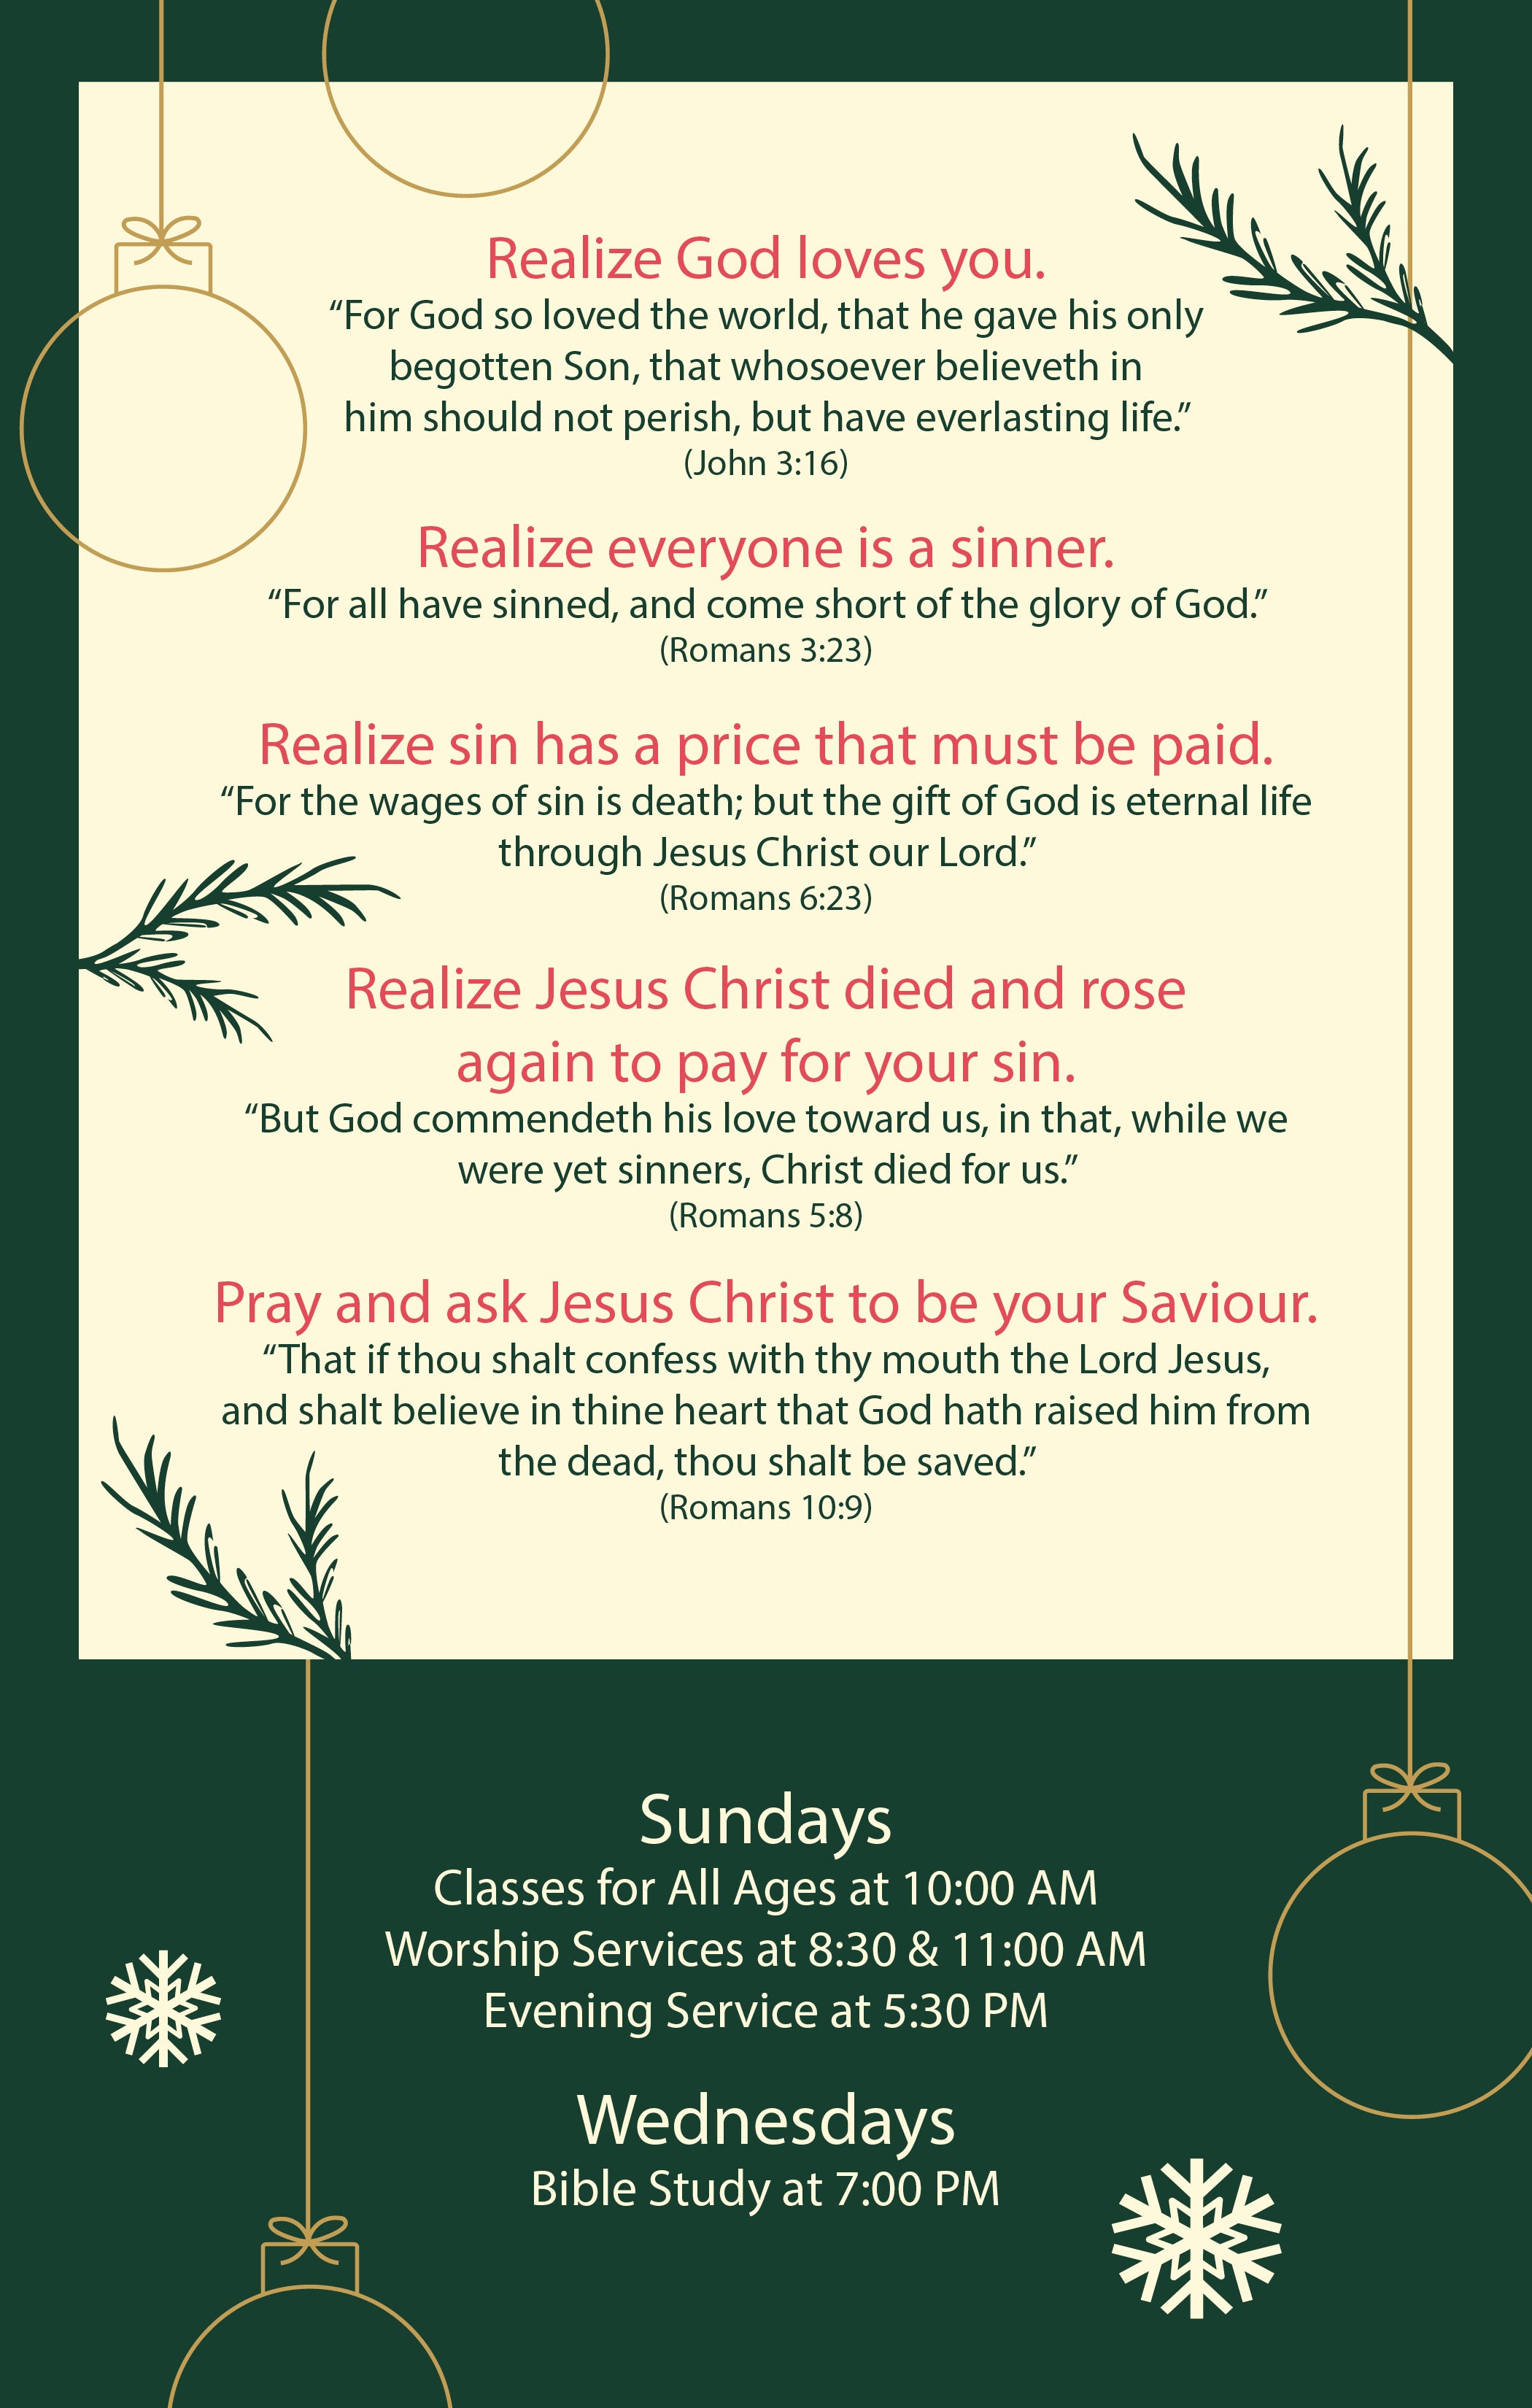 Be Our Guest—Christmas Outreach Card